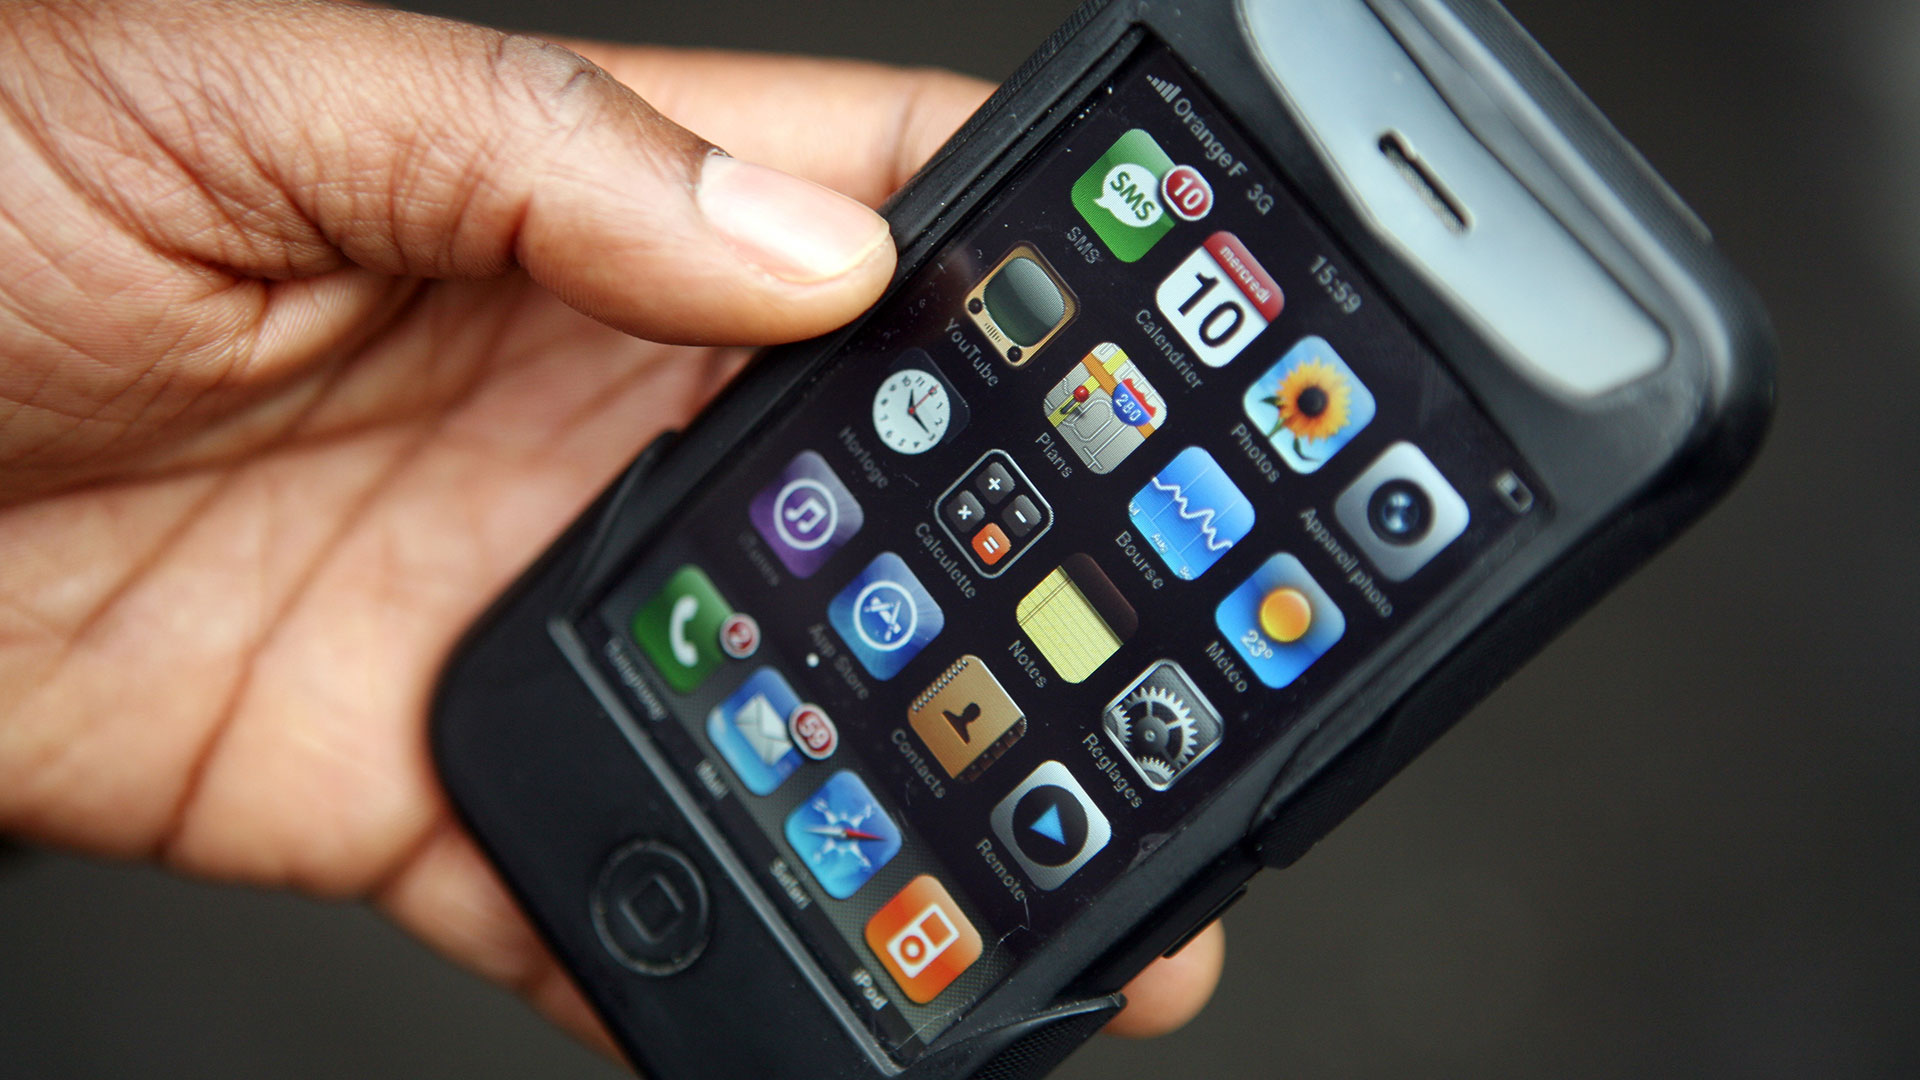 Can't brick a phone if it already is one. (taps temple) (Photo: Loic Venance / Staff, Getty Images)